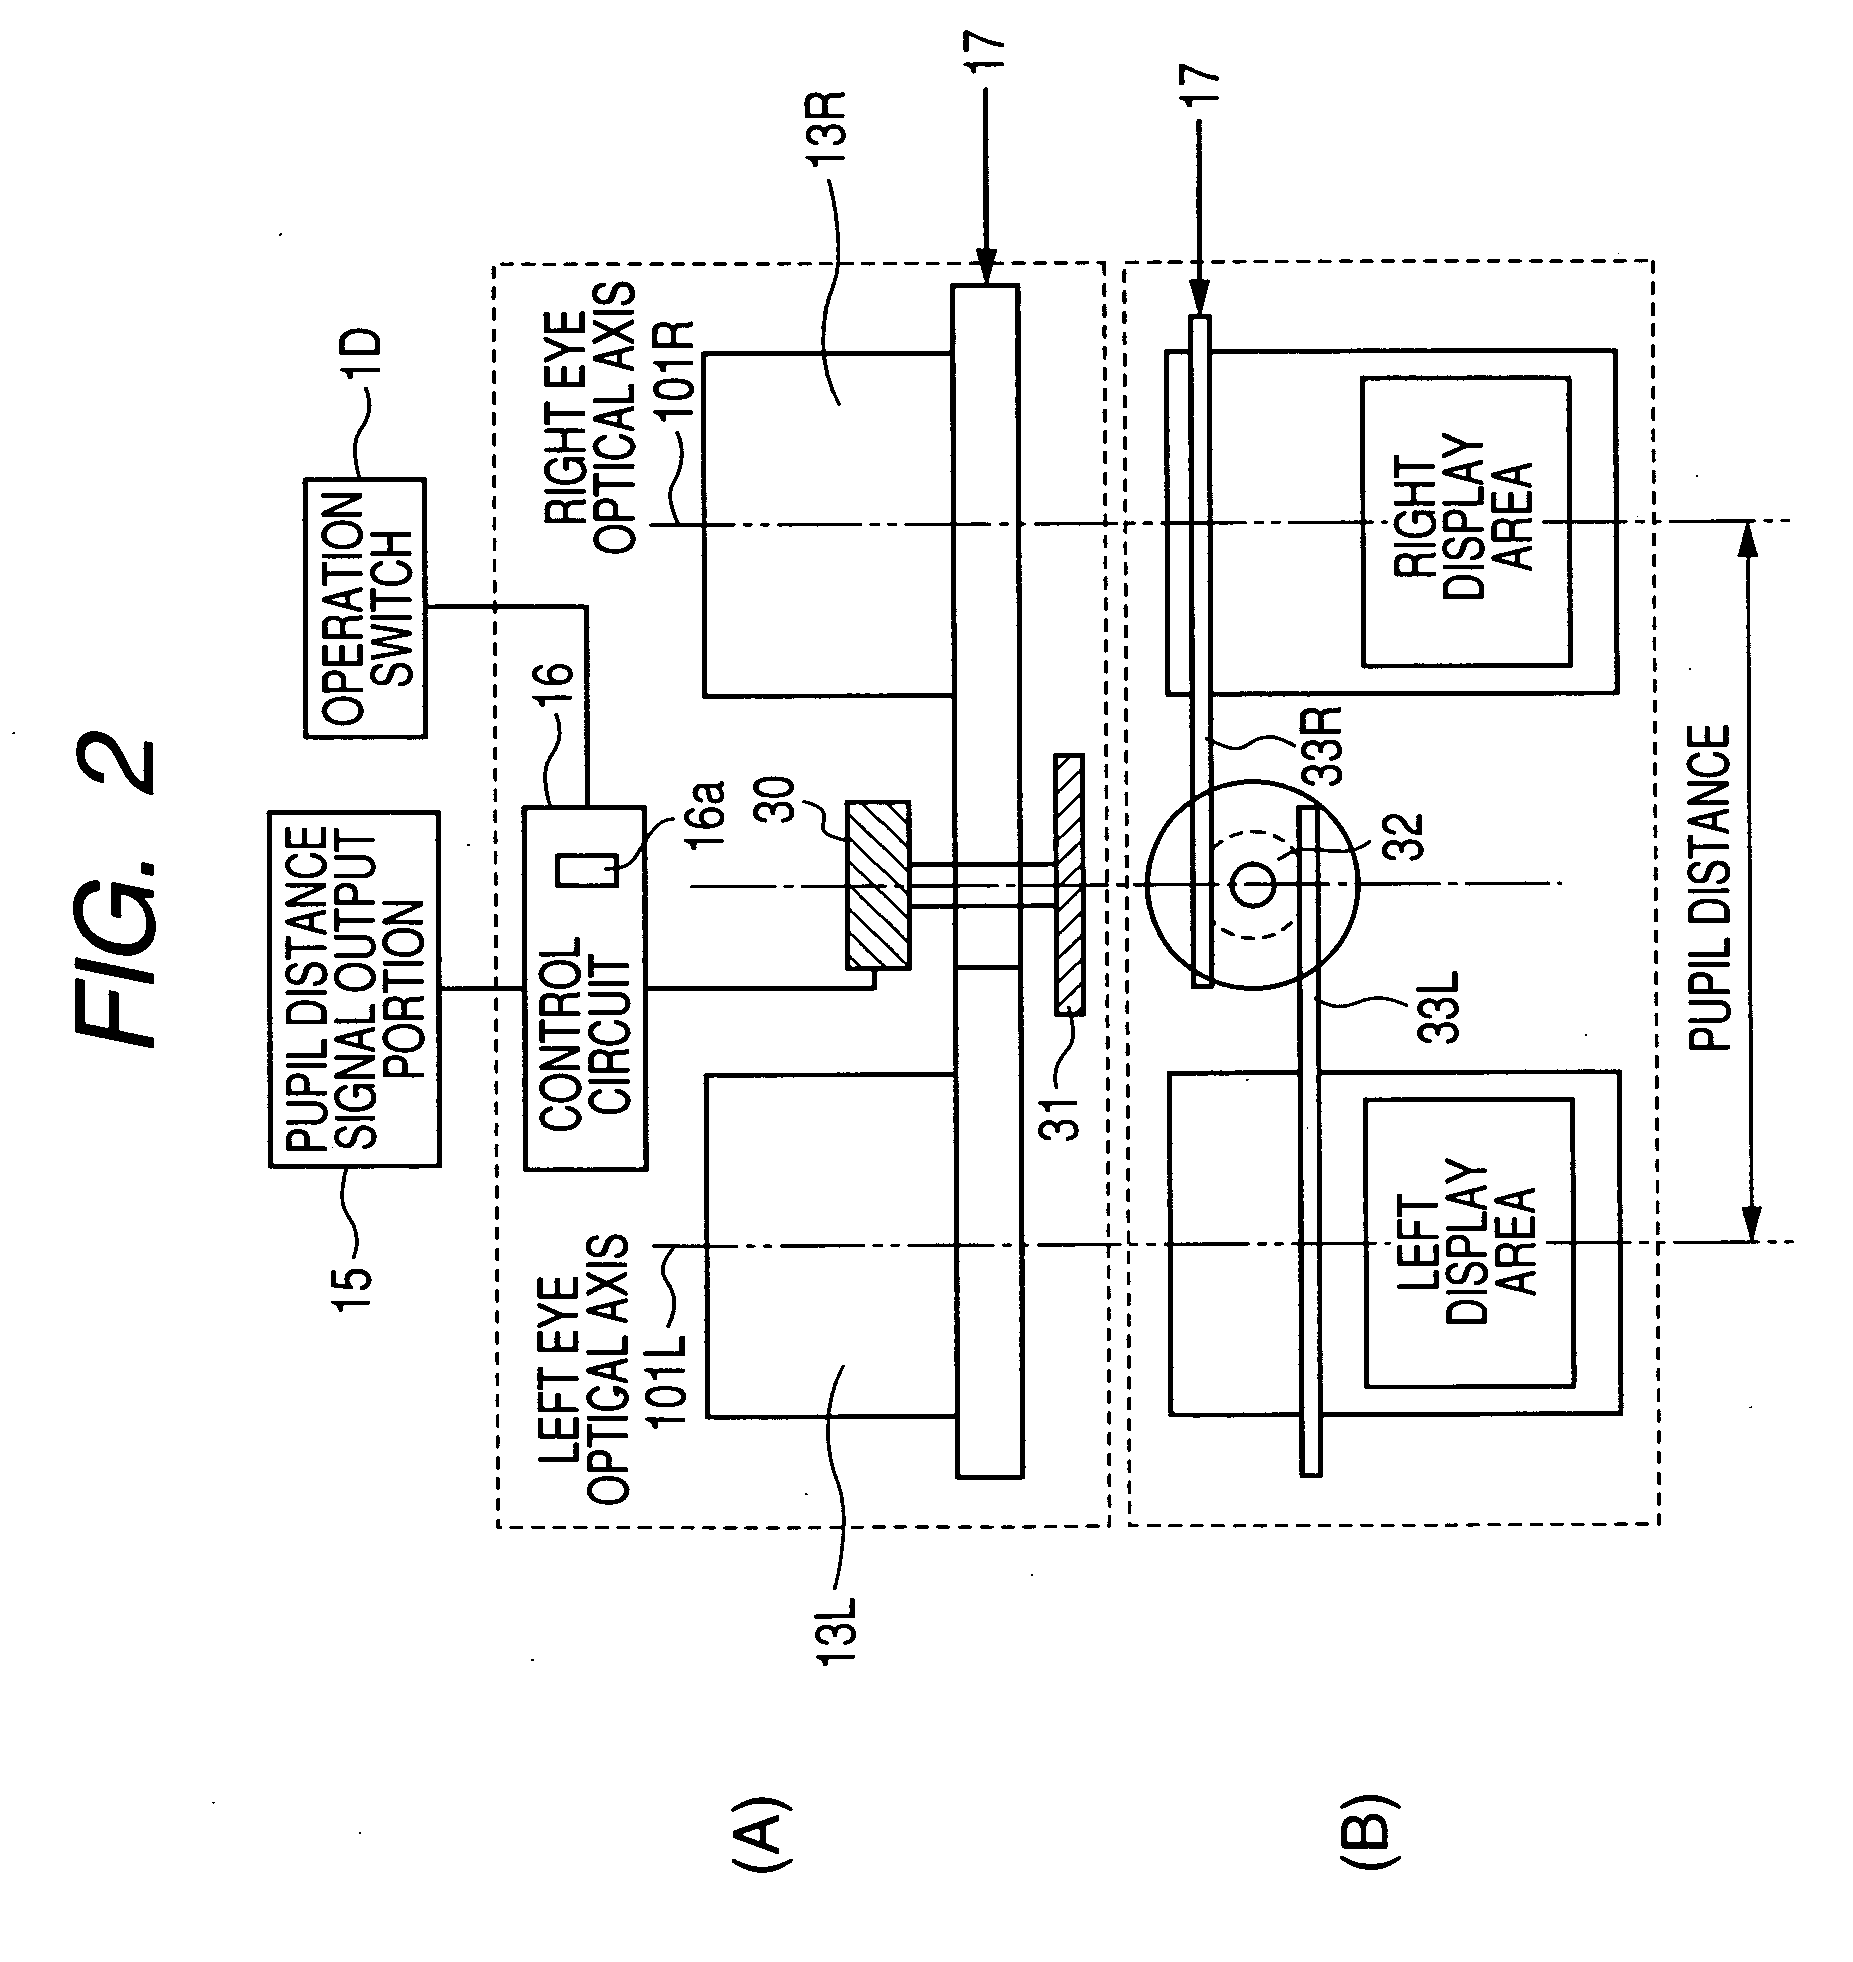 Image display apparatus and image display system